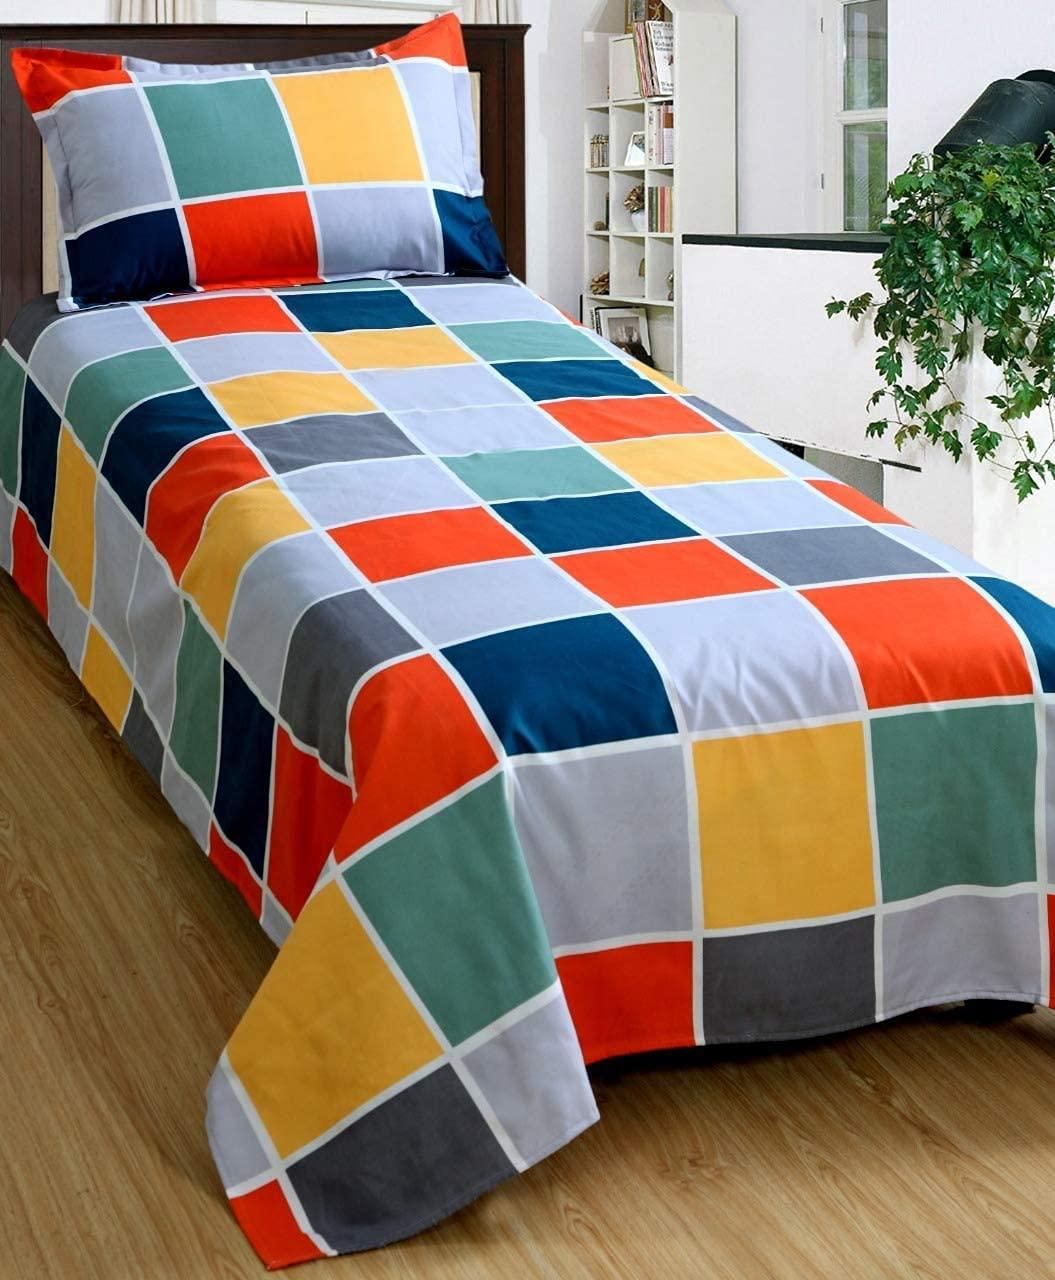 Glace Cotton Printed Single Bedsheets